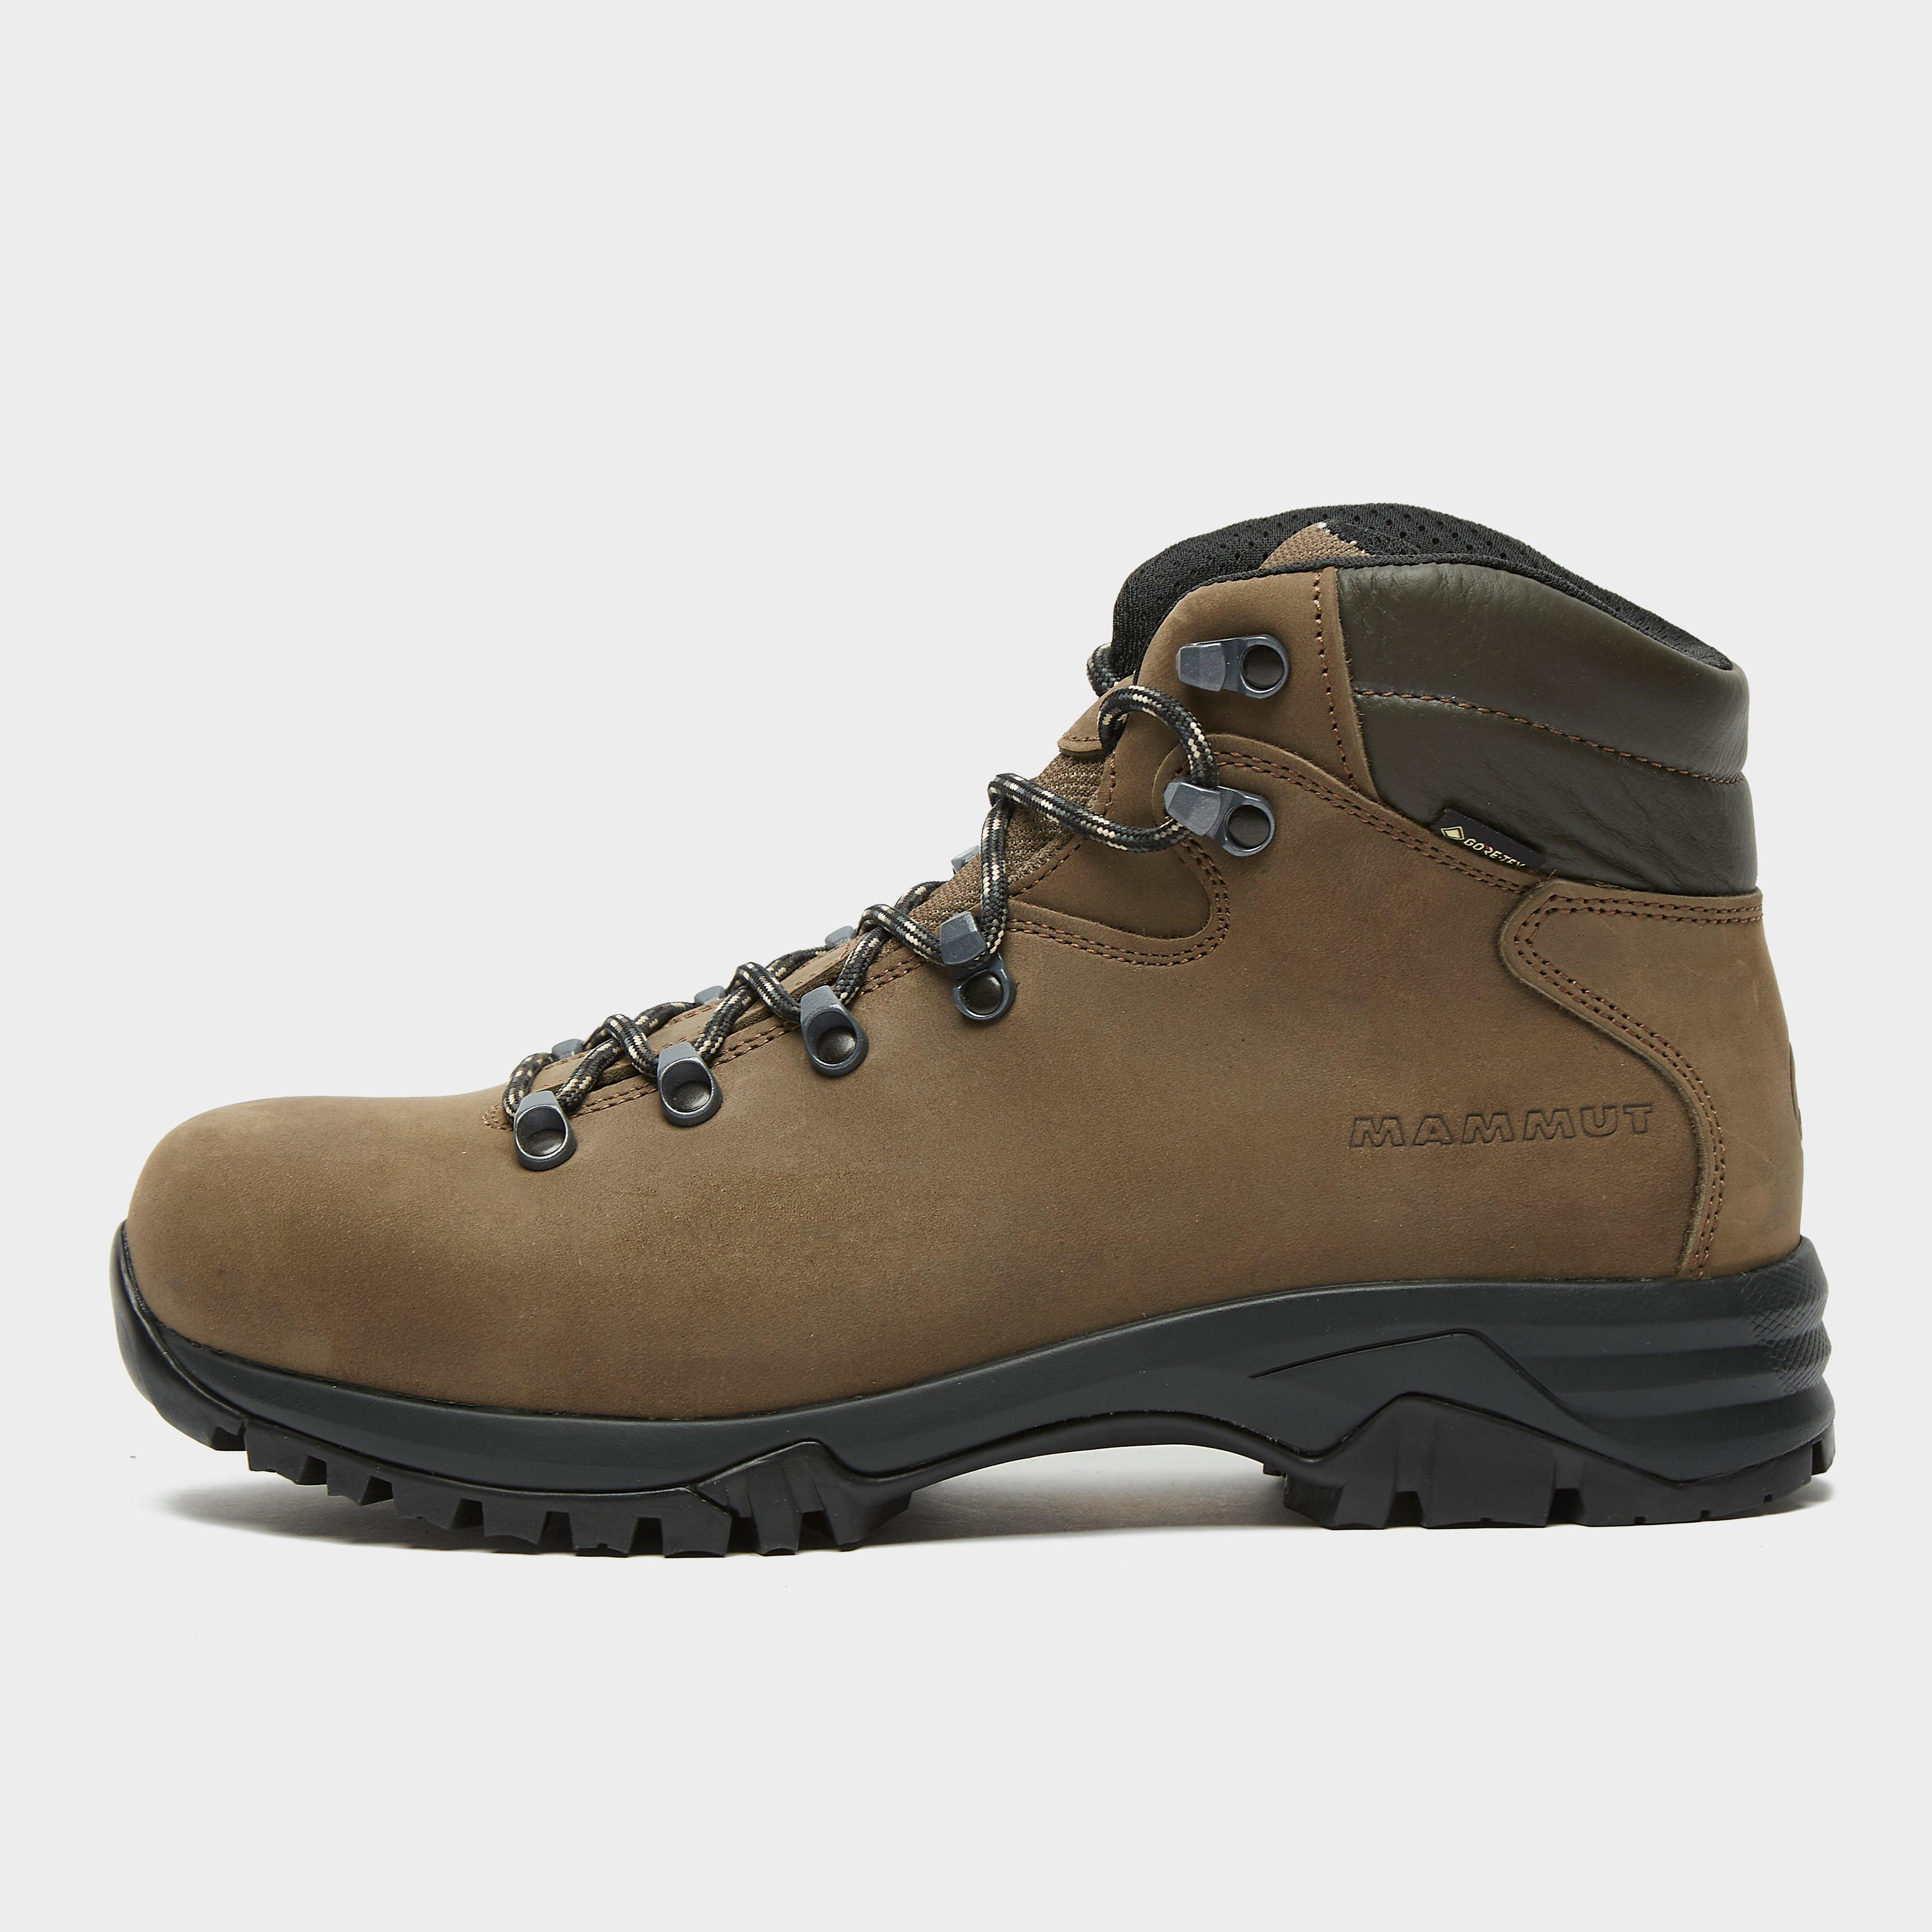 mens walking boots go outdoors